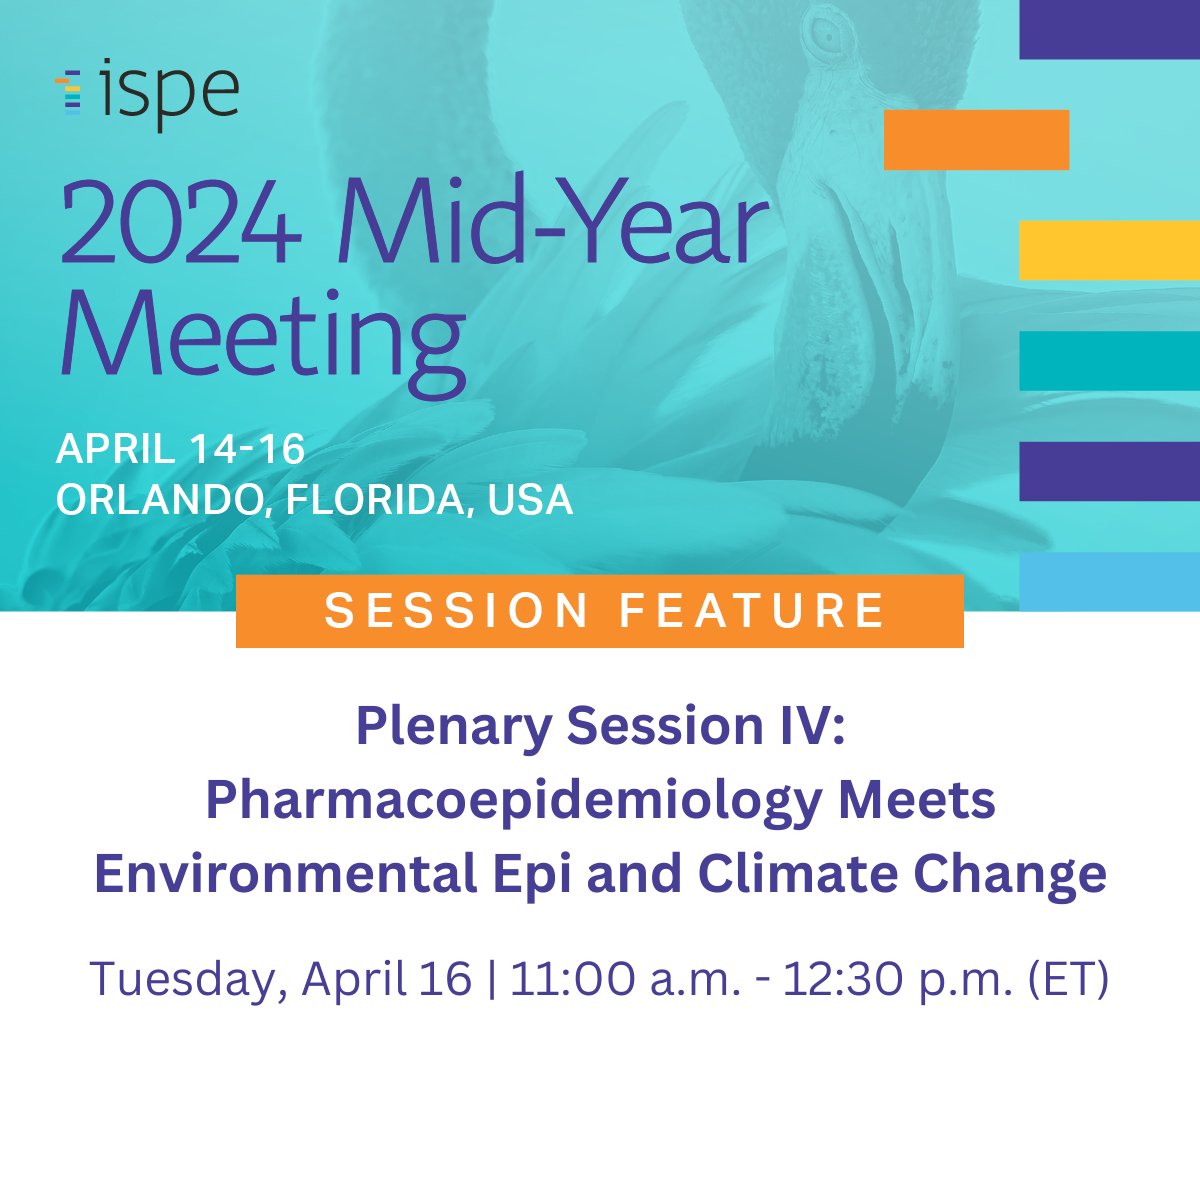 Explore the link between medication management & climate change at this year's Mid-Year Meeting in Orlando. Learn how #Pharmacoepidemiology research informs strategies for environmental sustainability: bit.ly/3URdrph #PharmEpi #EpiTwitter #ISPEMY2024